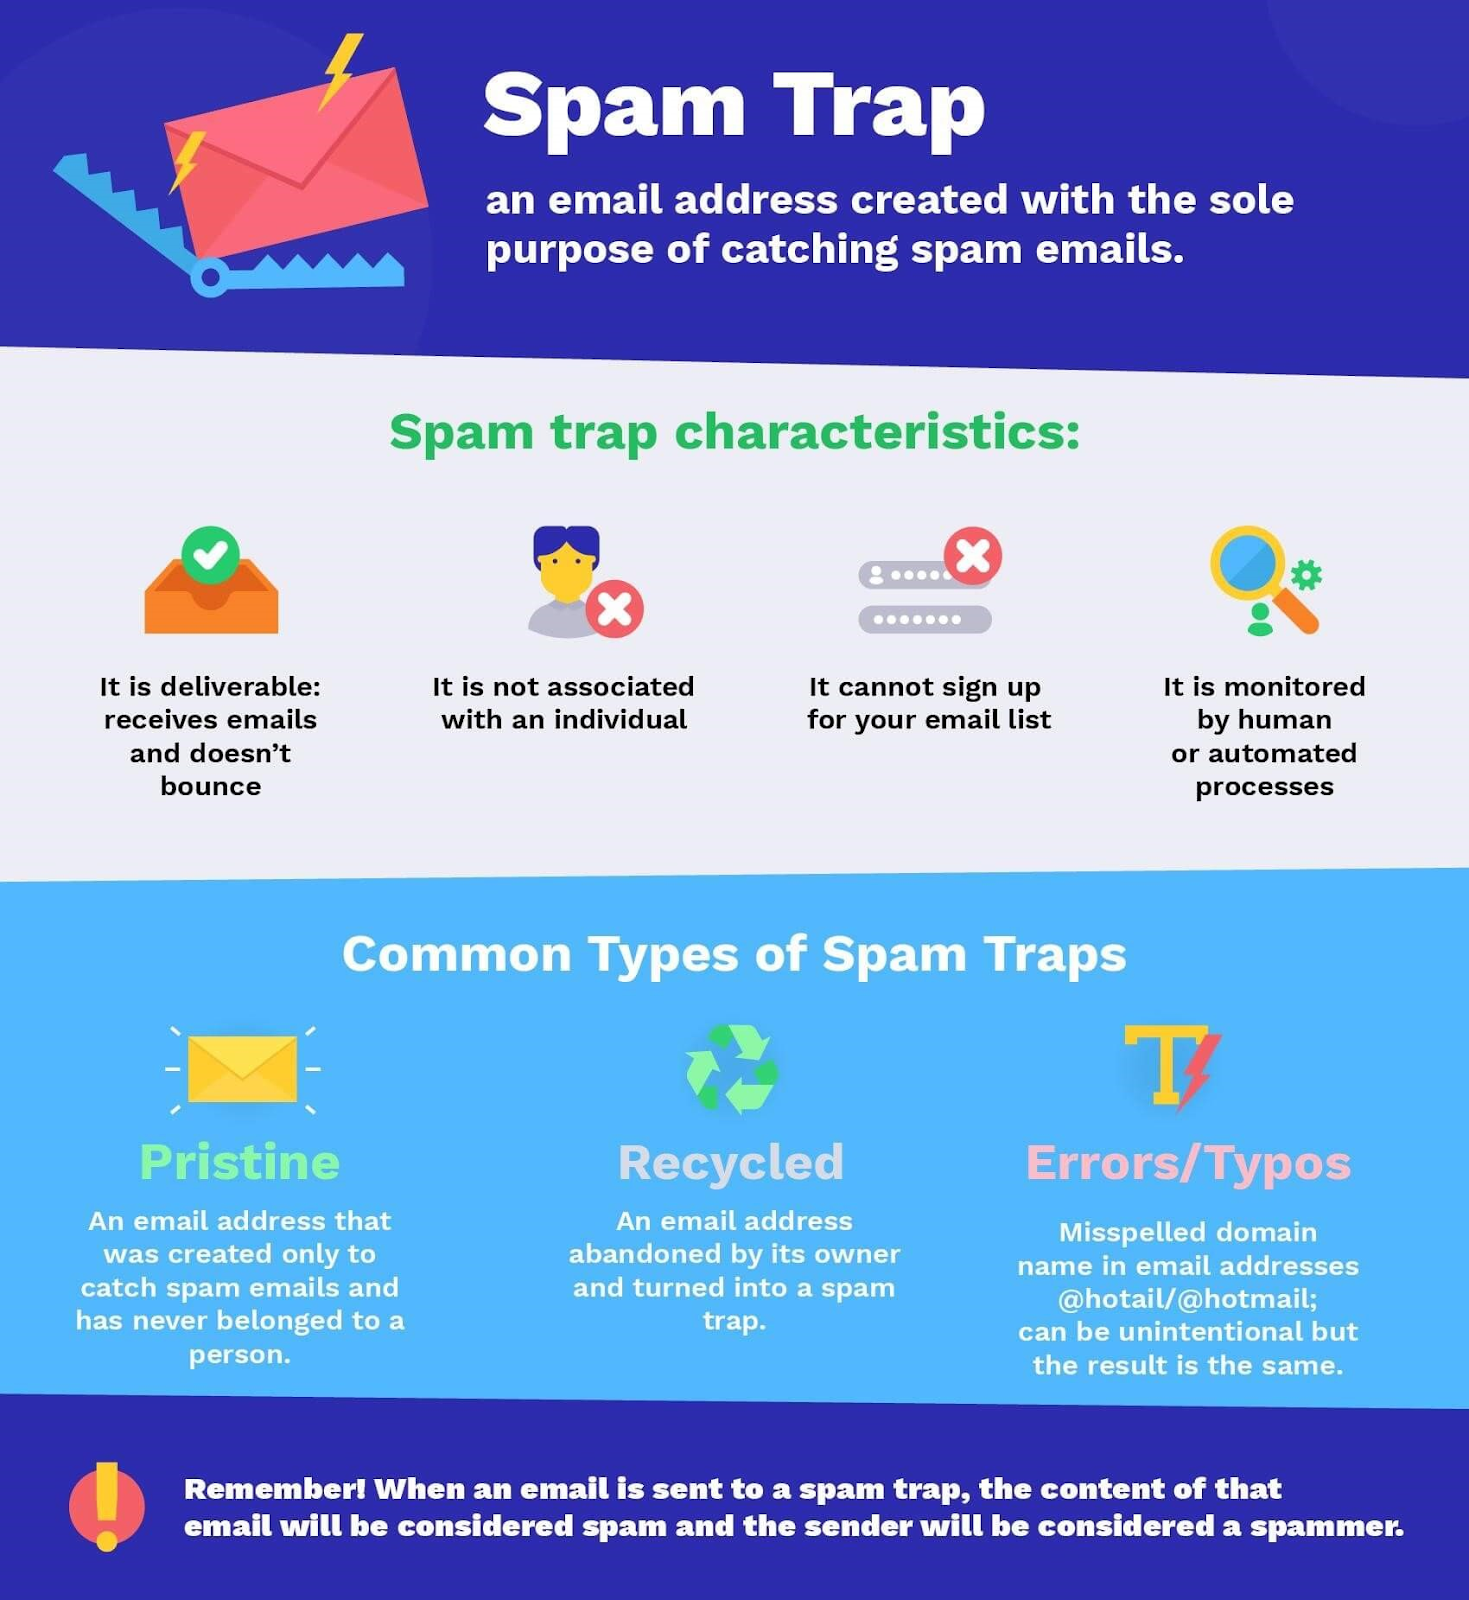 Strategies for Identifying and Removing Spam Traps